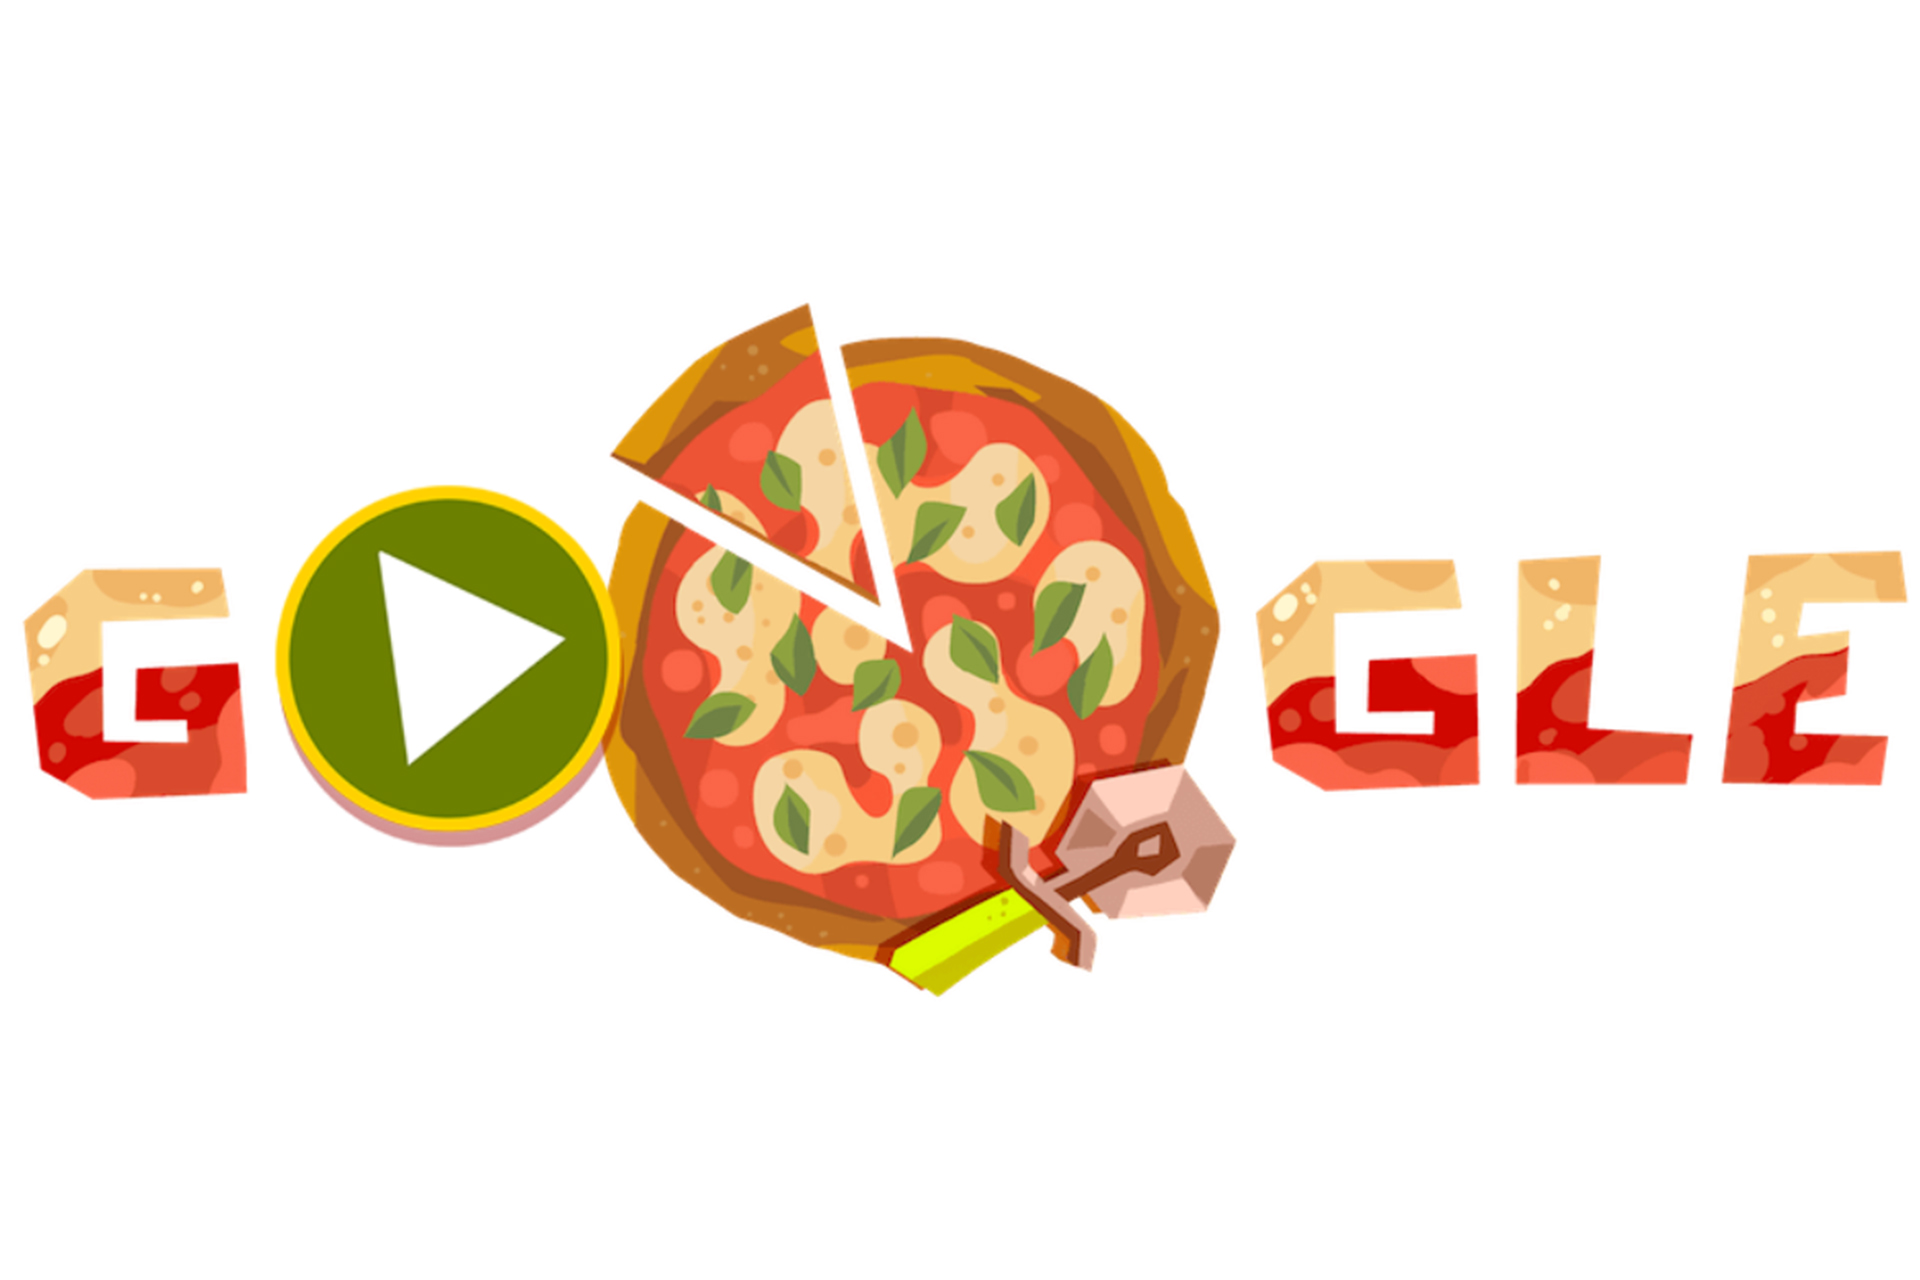 Google Doodle celebrates pizza with interactive puzzle game